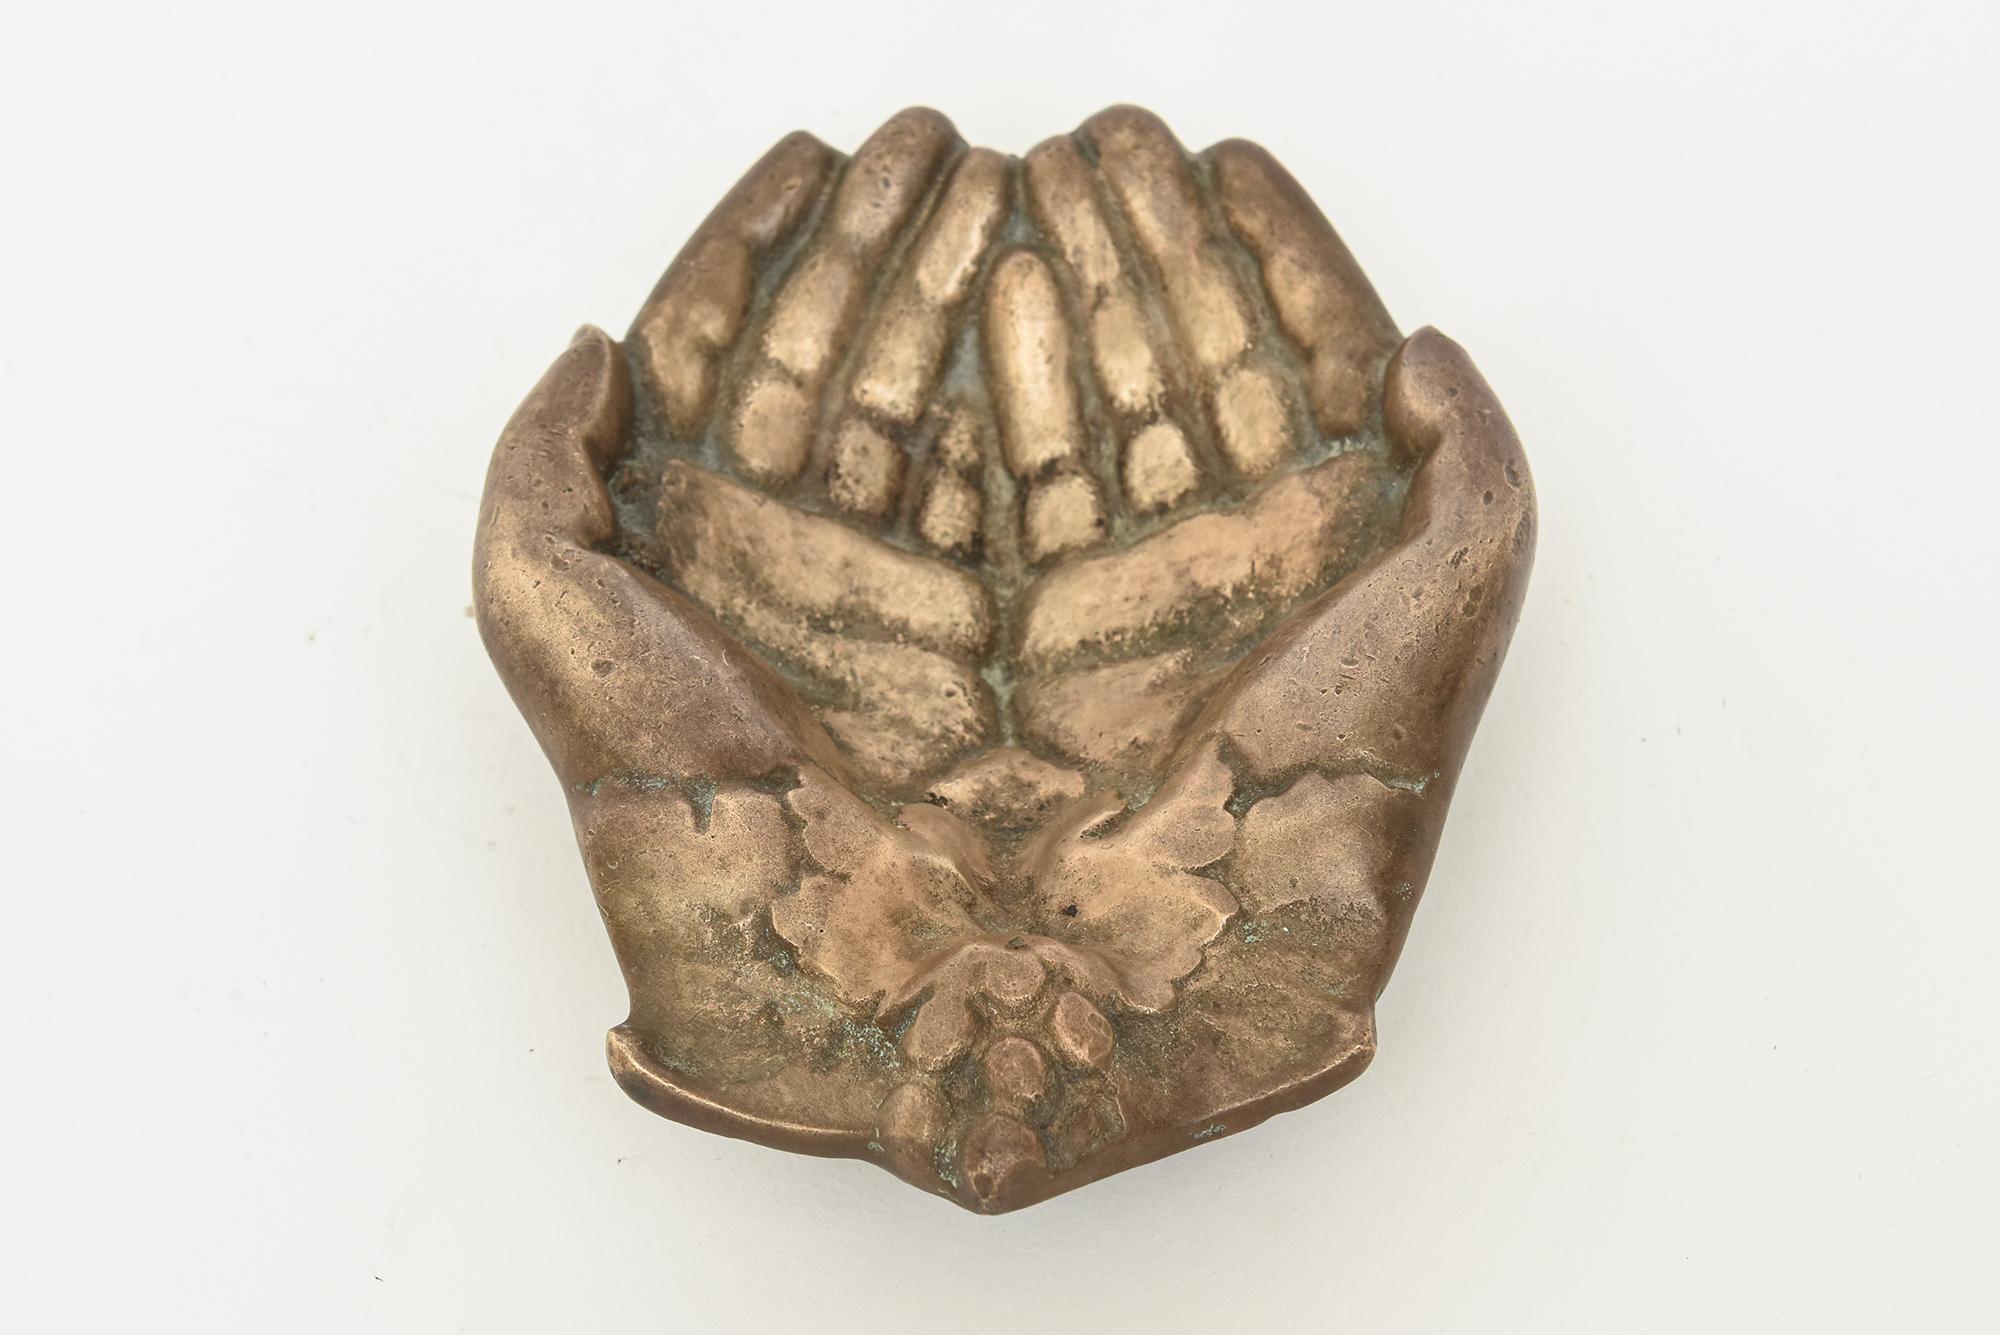 Vintage Brass Praying Hands Paperweight, Desk Accessory, Bowl or Object In Good Condition For Sale In North Miami, FL